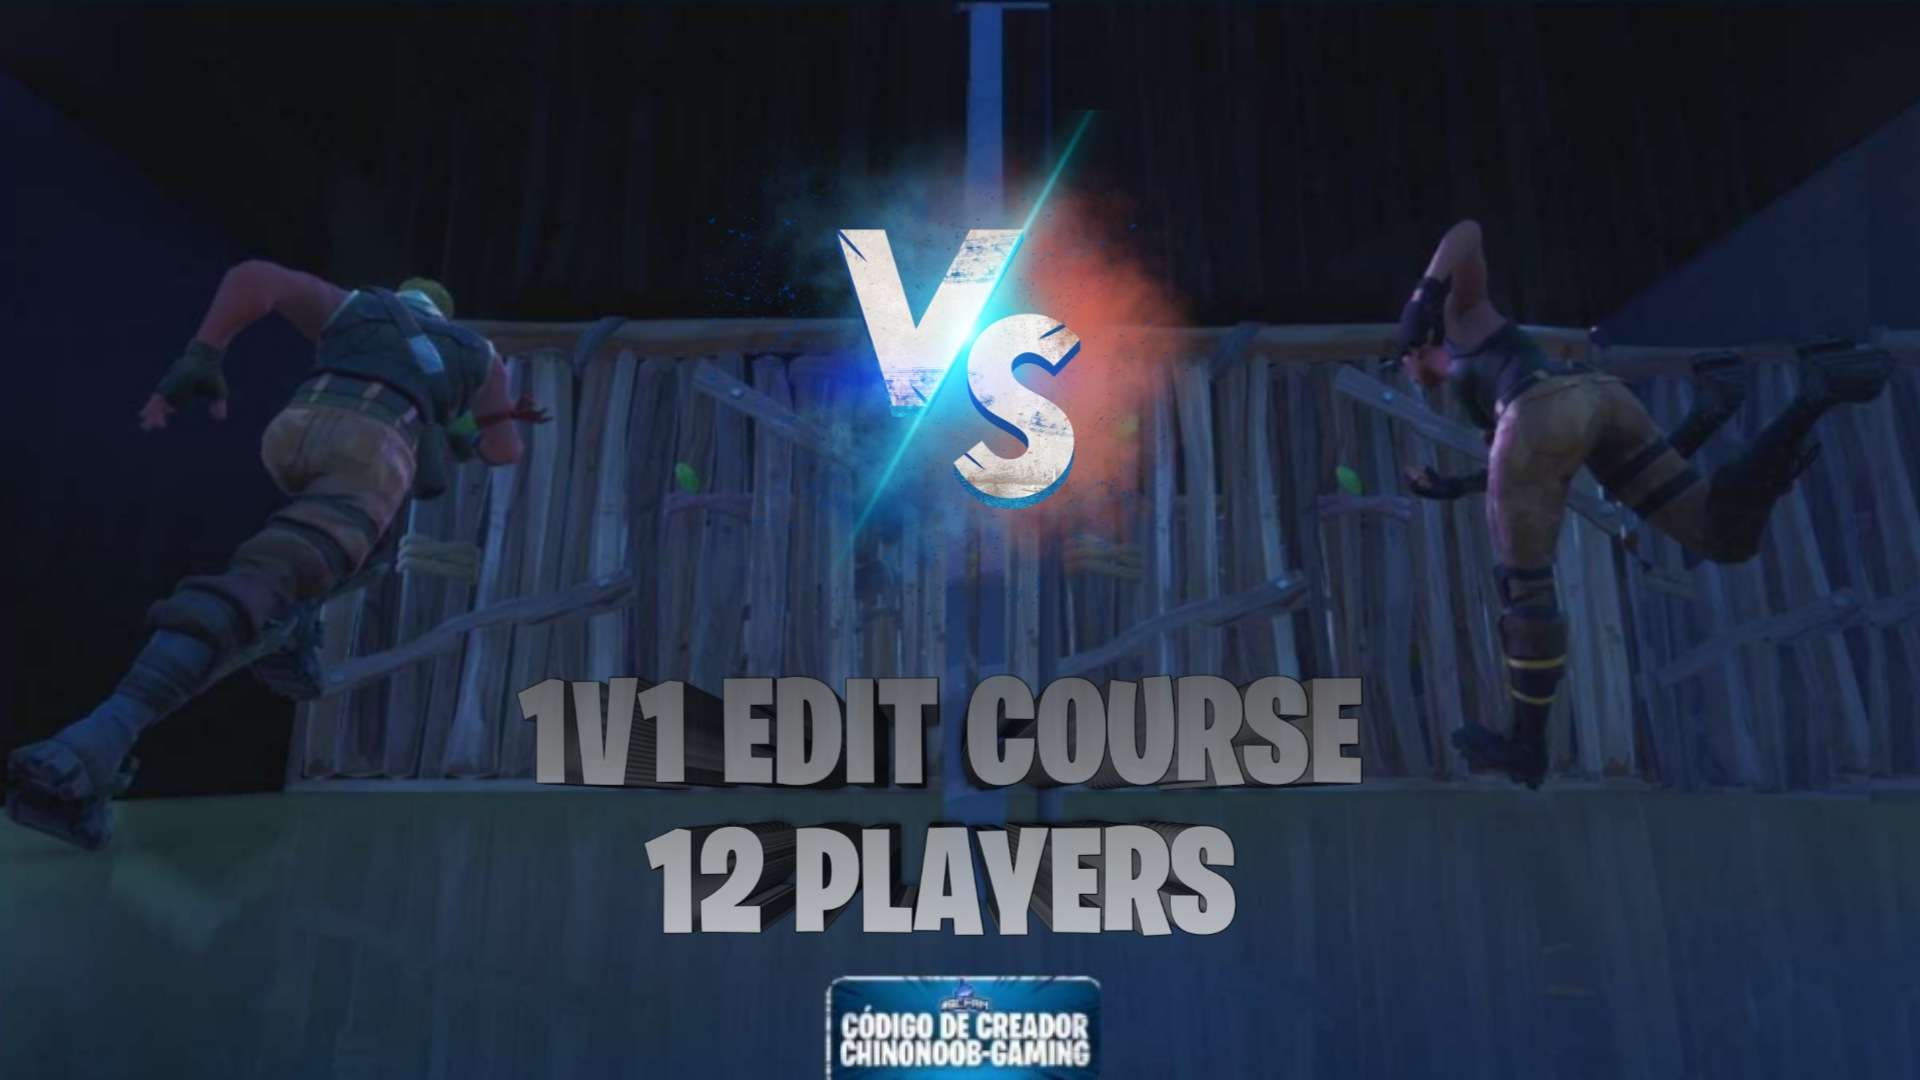 1V1 EDIT COURSE 12 PLAYERS